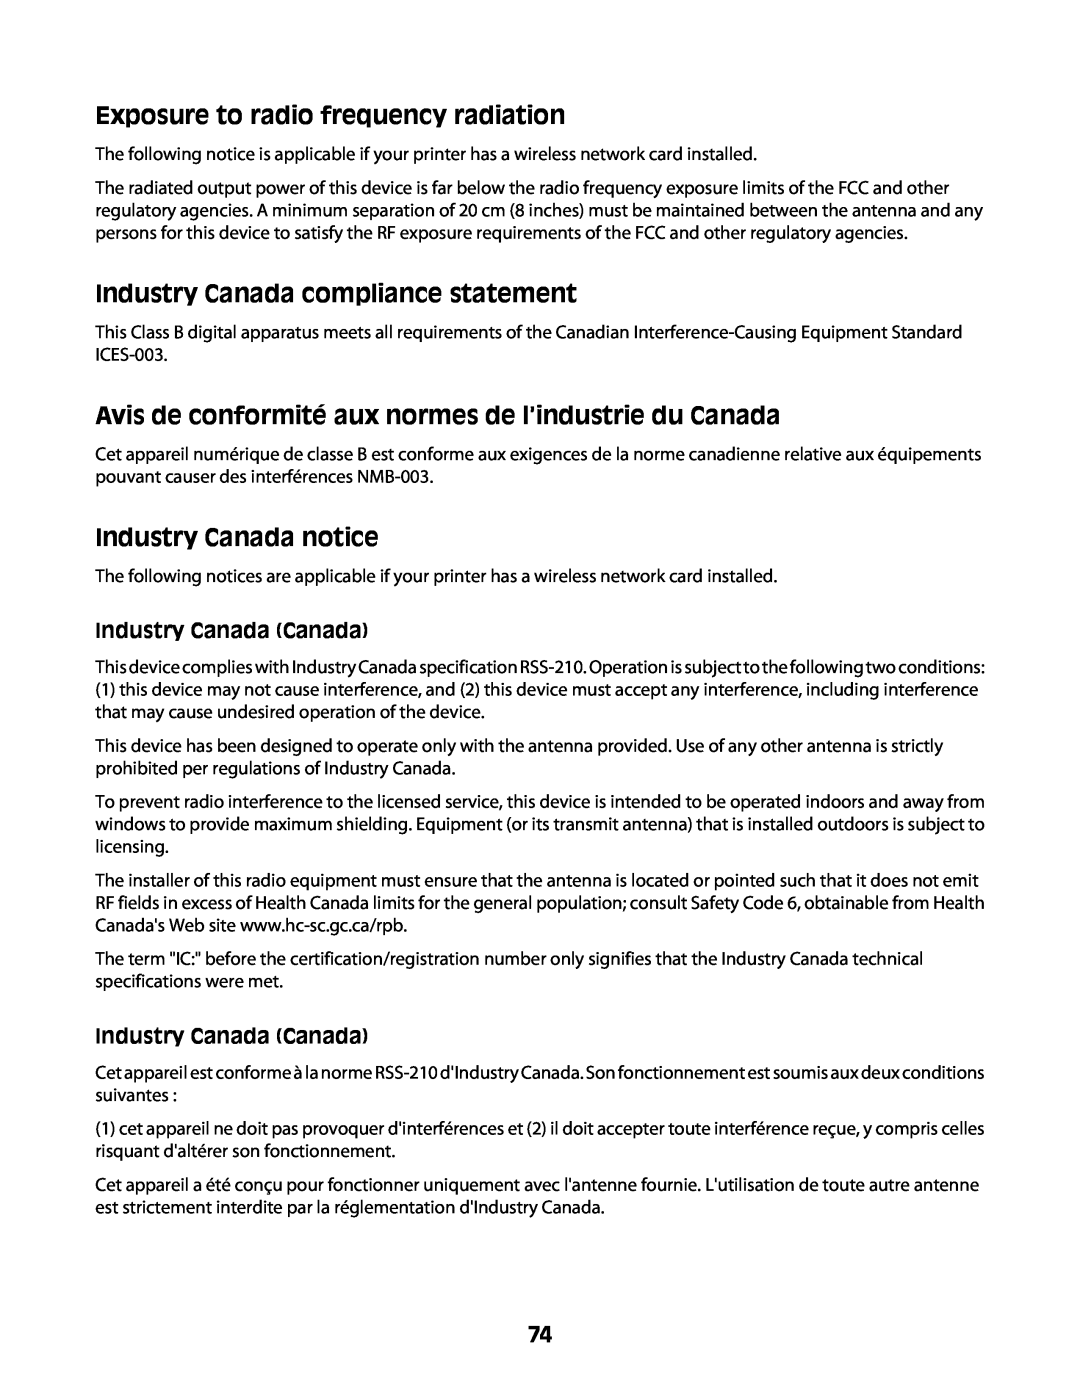 Lexmark Z2400 Series Exposure to radio frequency radiation, Industry Canada compliance statement, Industry Canada notice 